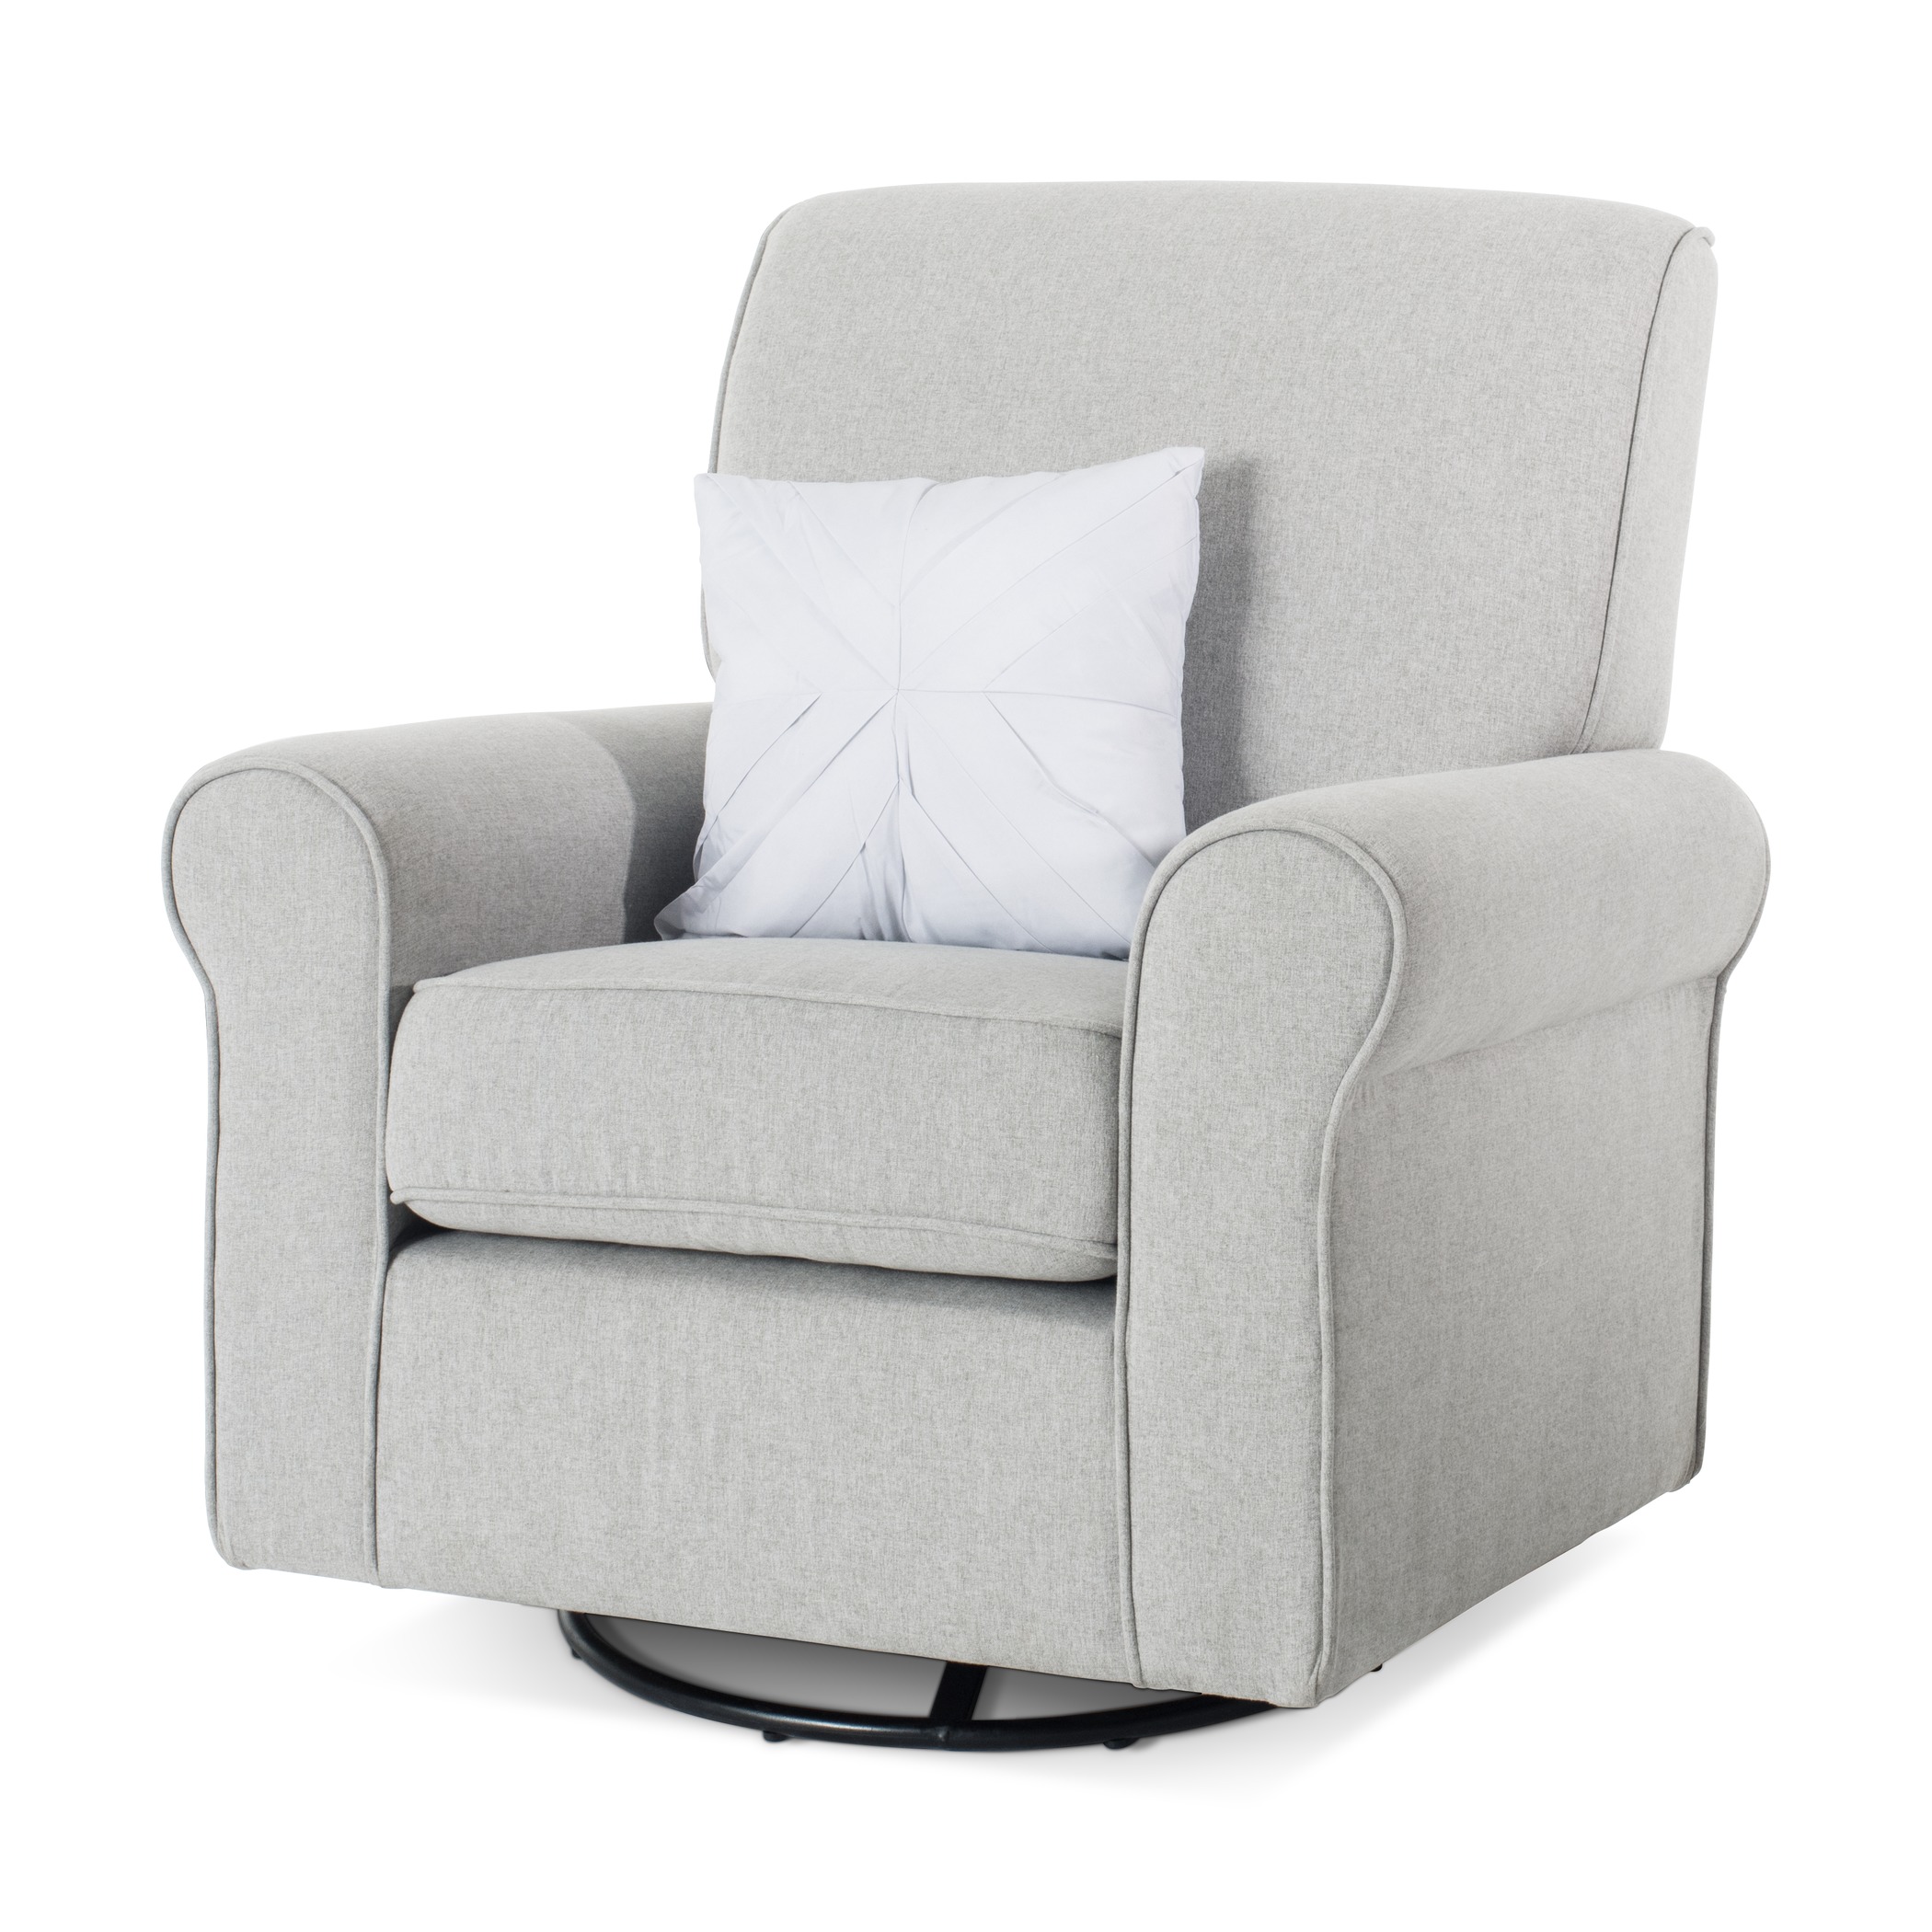 Serene Upholstered Swivel Glider Rocker Chair in Flecked Gray by Forever Eclectic - image 2 of 6